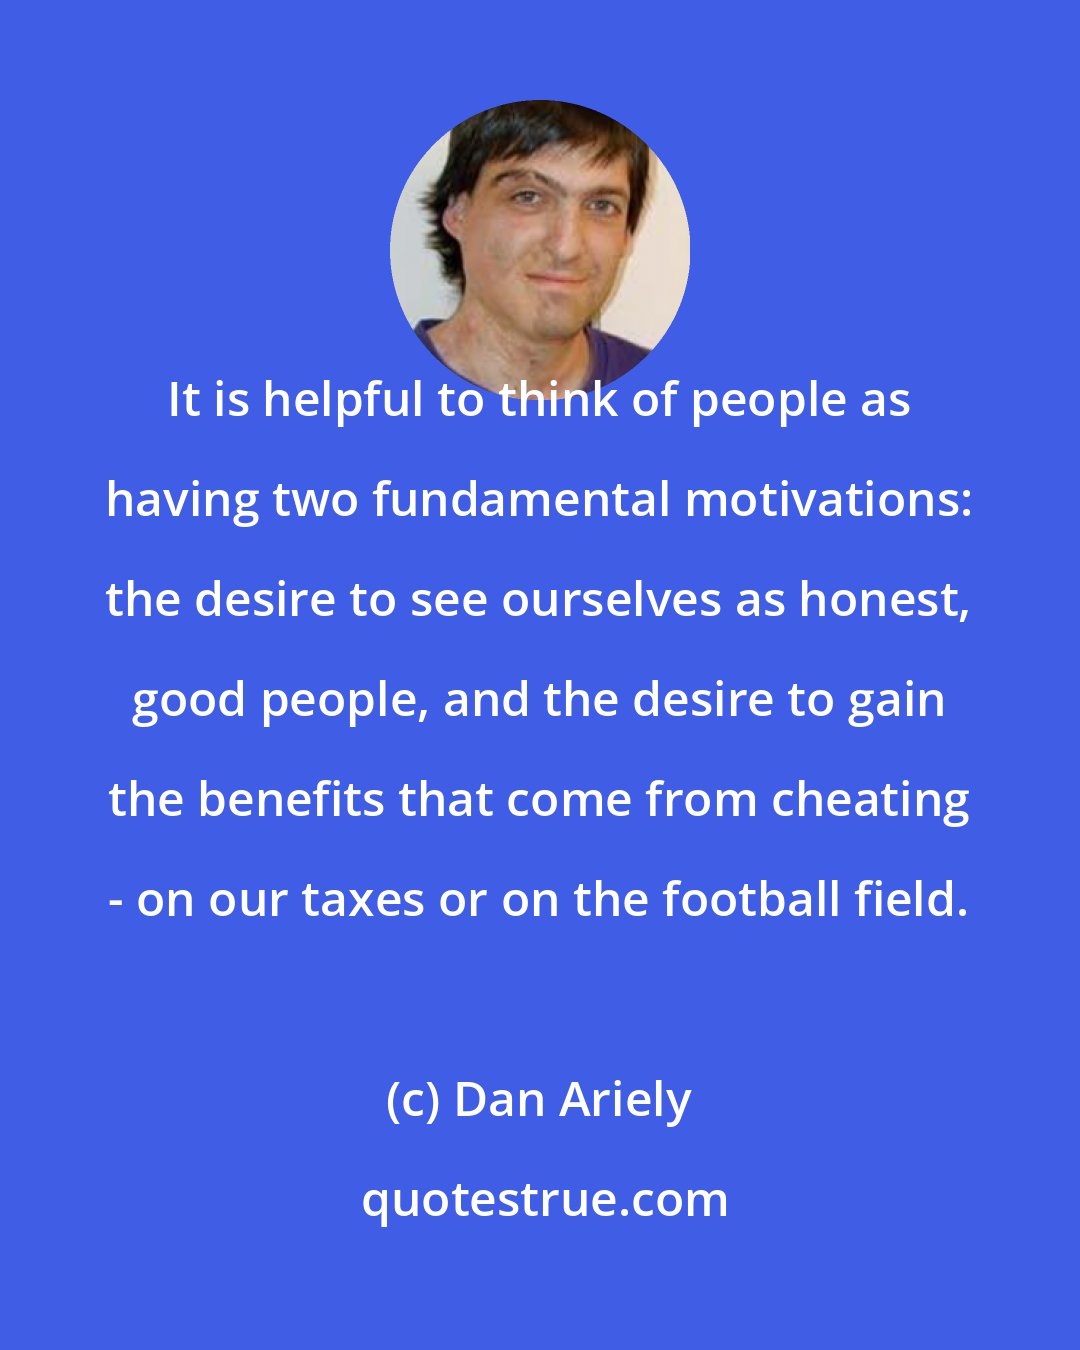 Dan Ariely: It is helpful to think of people as having two fundamental motivations: the desire to see ourselves as honest, good people, and the desire to gain the benefits that come from cheating - on our taxes or on the football field.